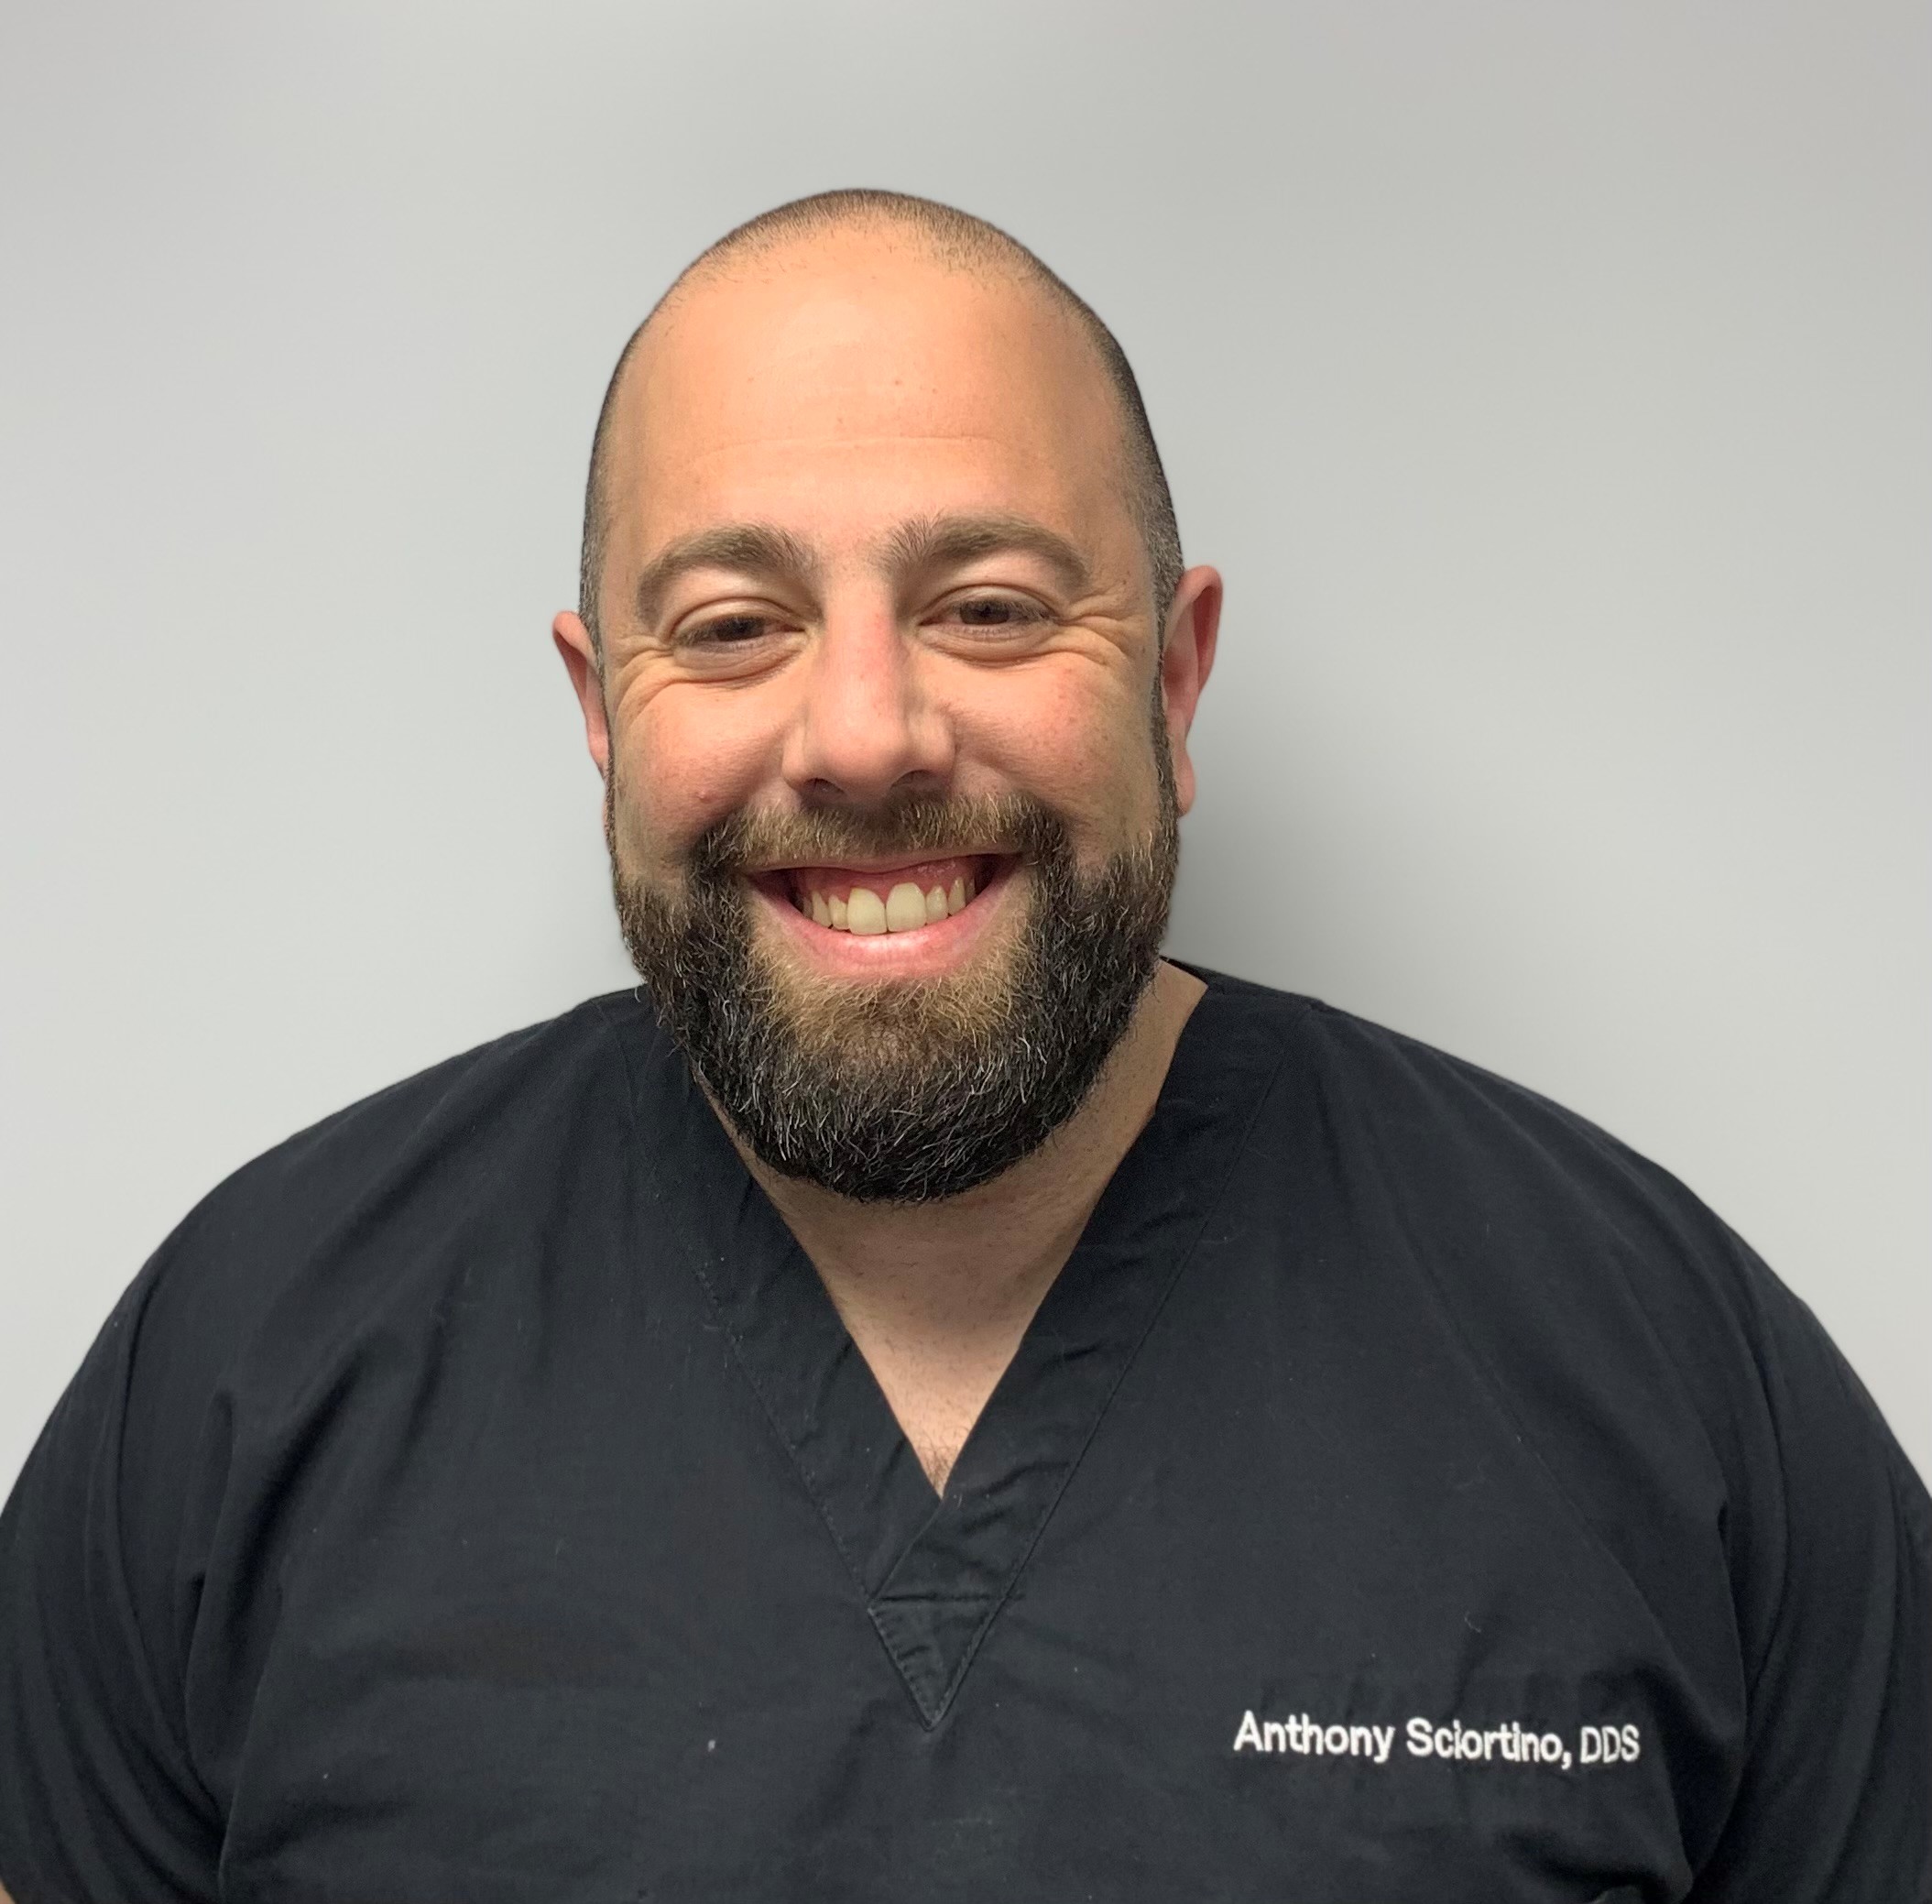 Photo of Dr. Anthony Sciortino, DDS, a board certified pediatric dentist at Haring Pediatric Dental in Dublin, OH